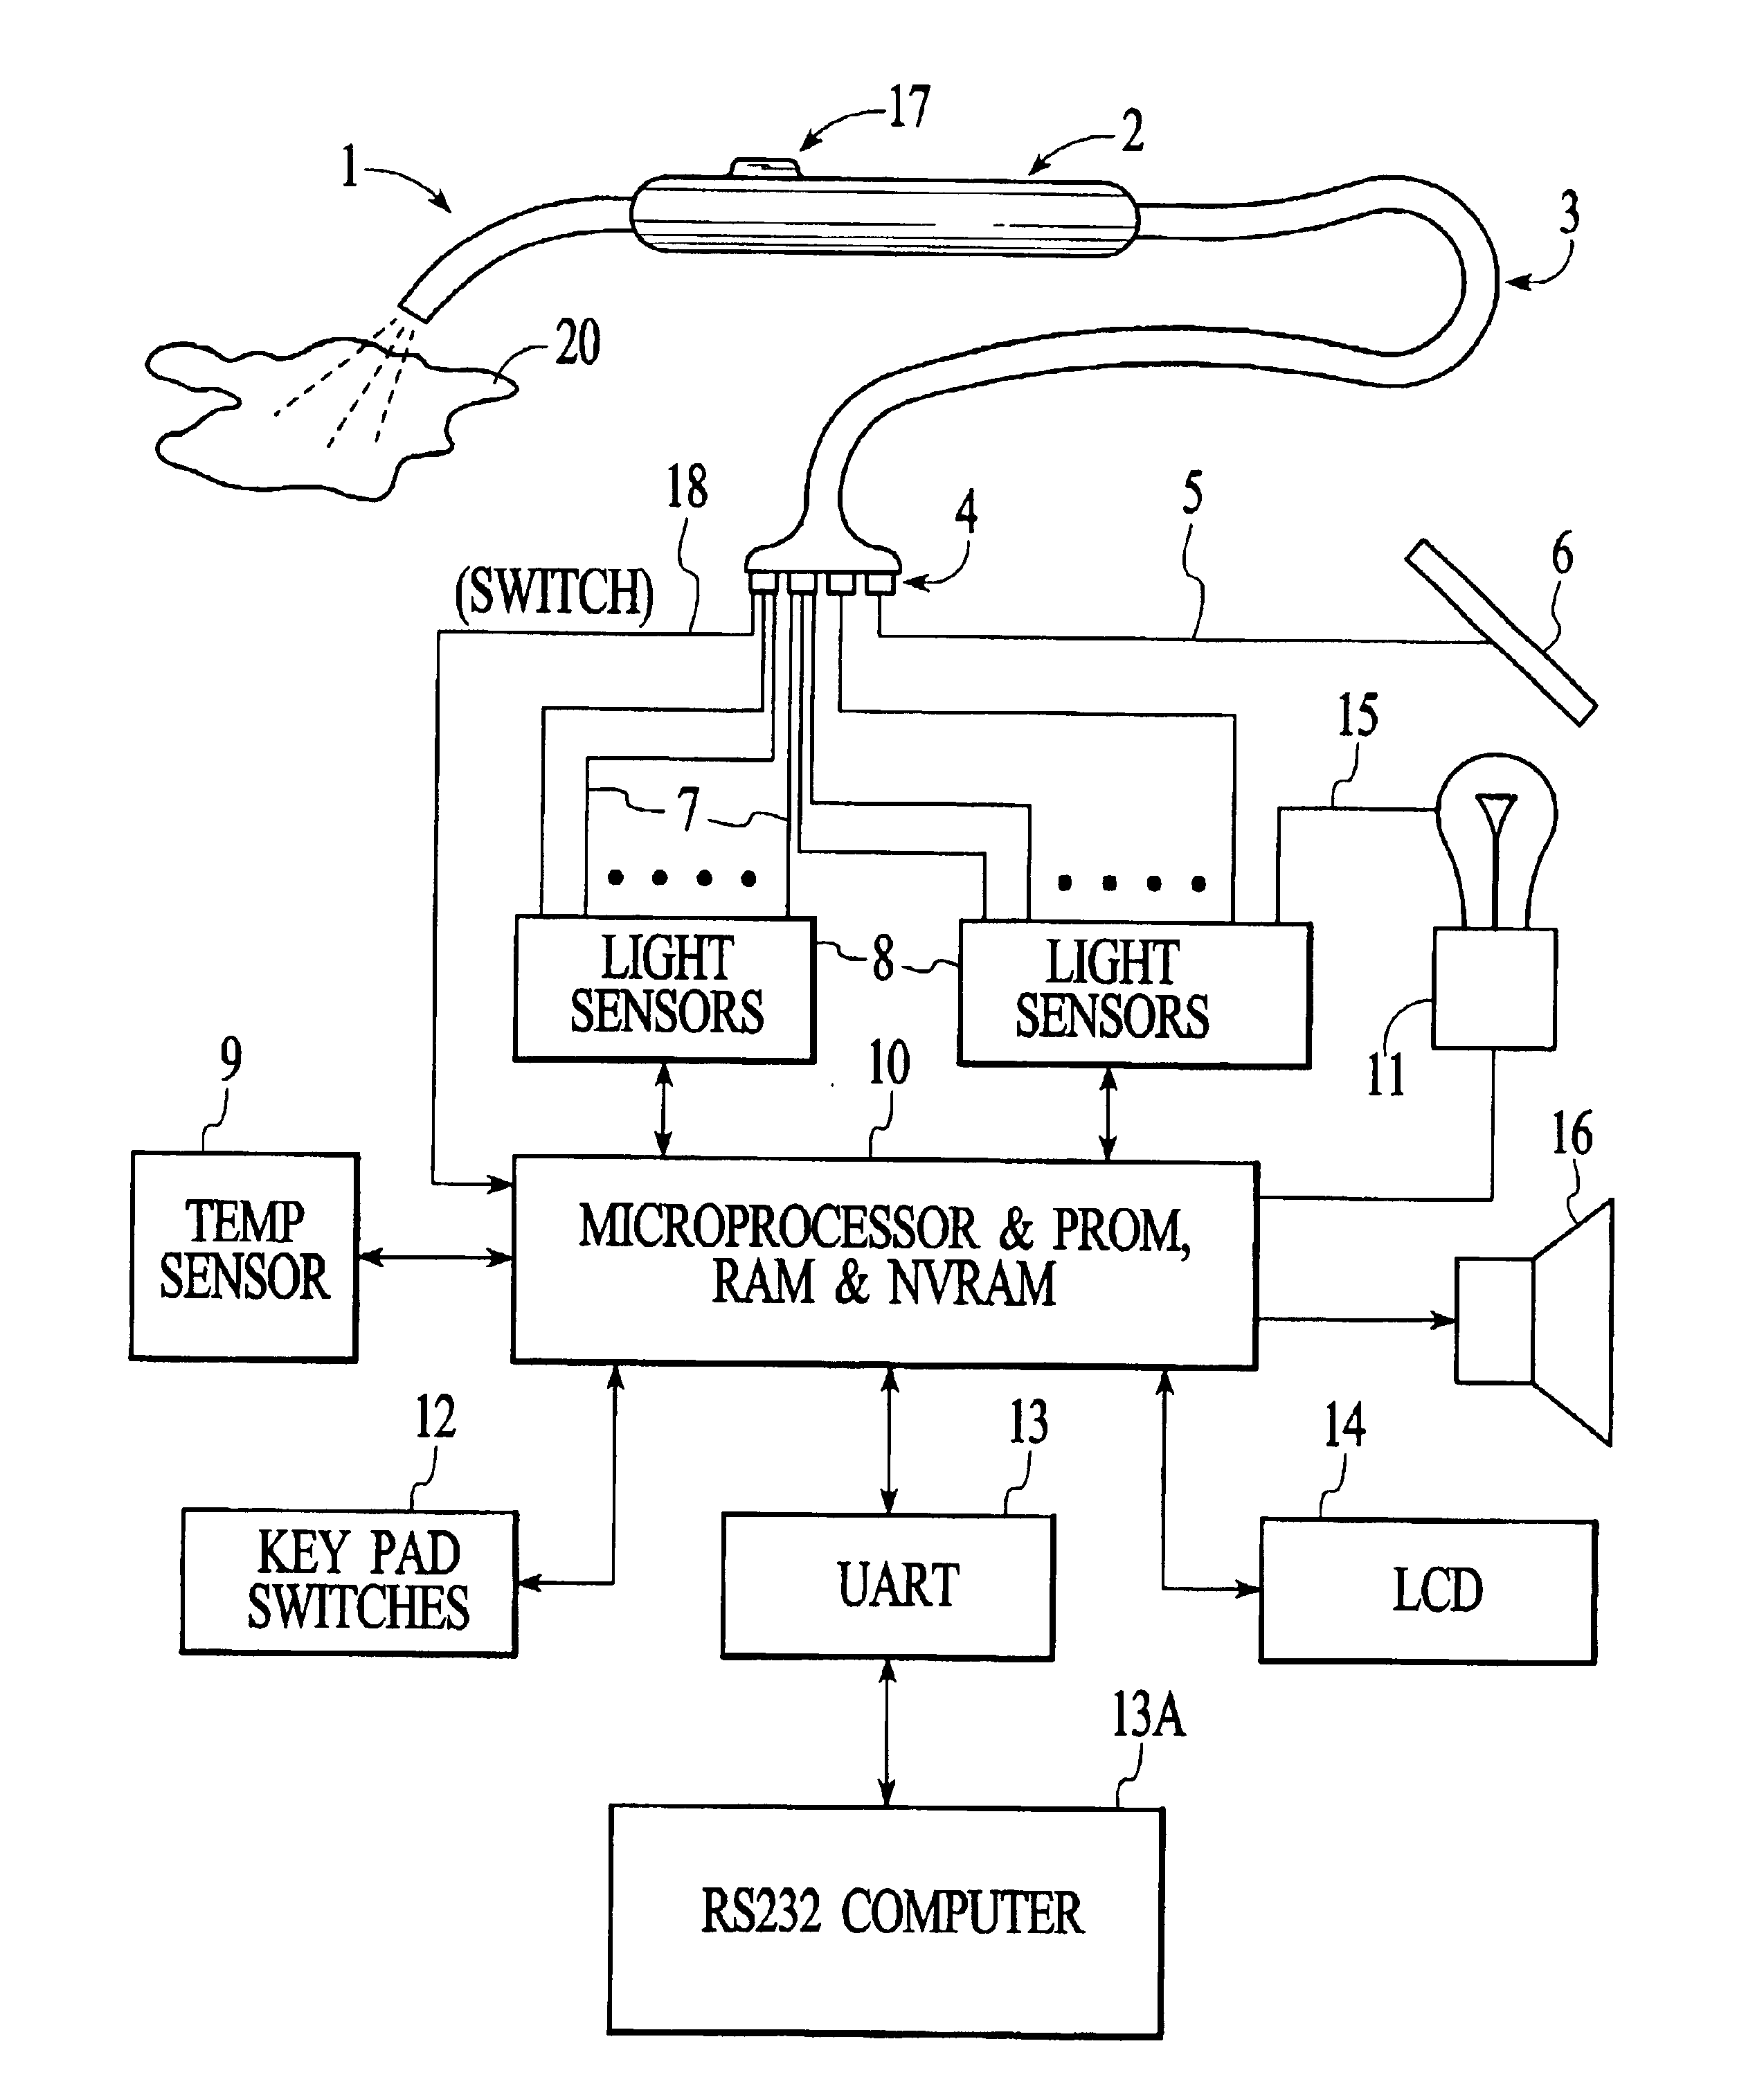 Spectrometer apparatus for determining an optical characteristic of an object or material having one or more sensors for determining a physical position or non-color property